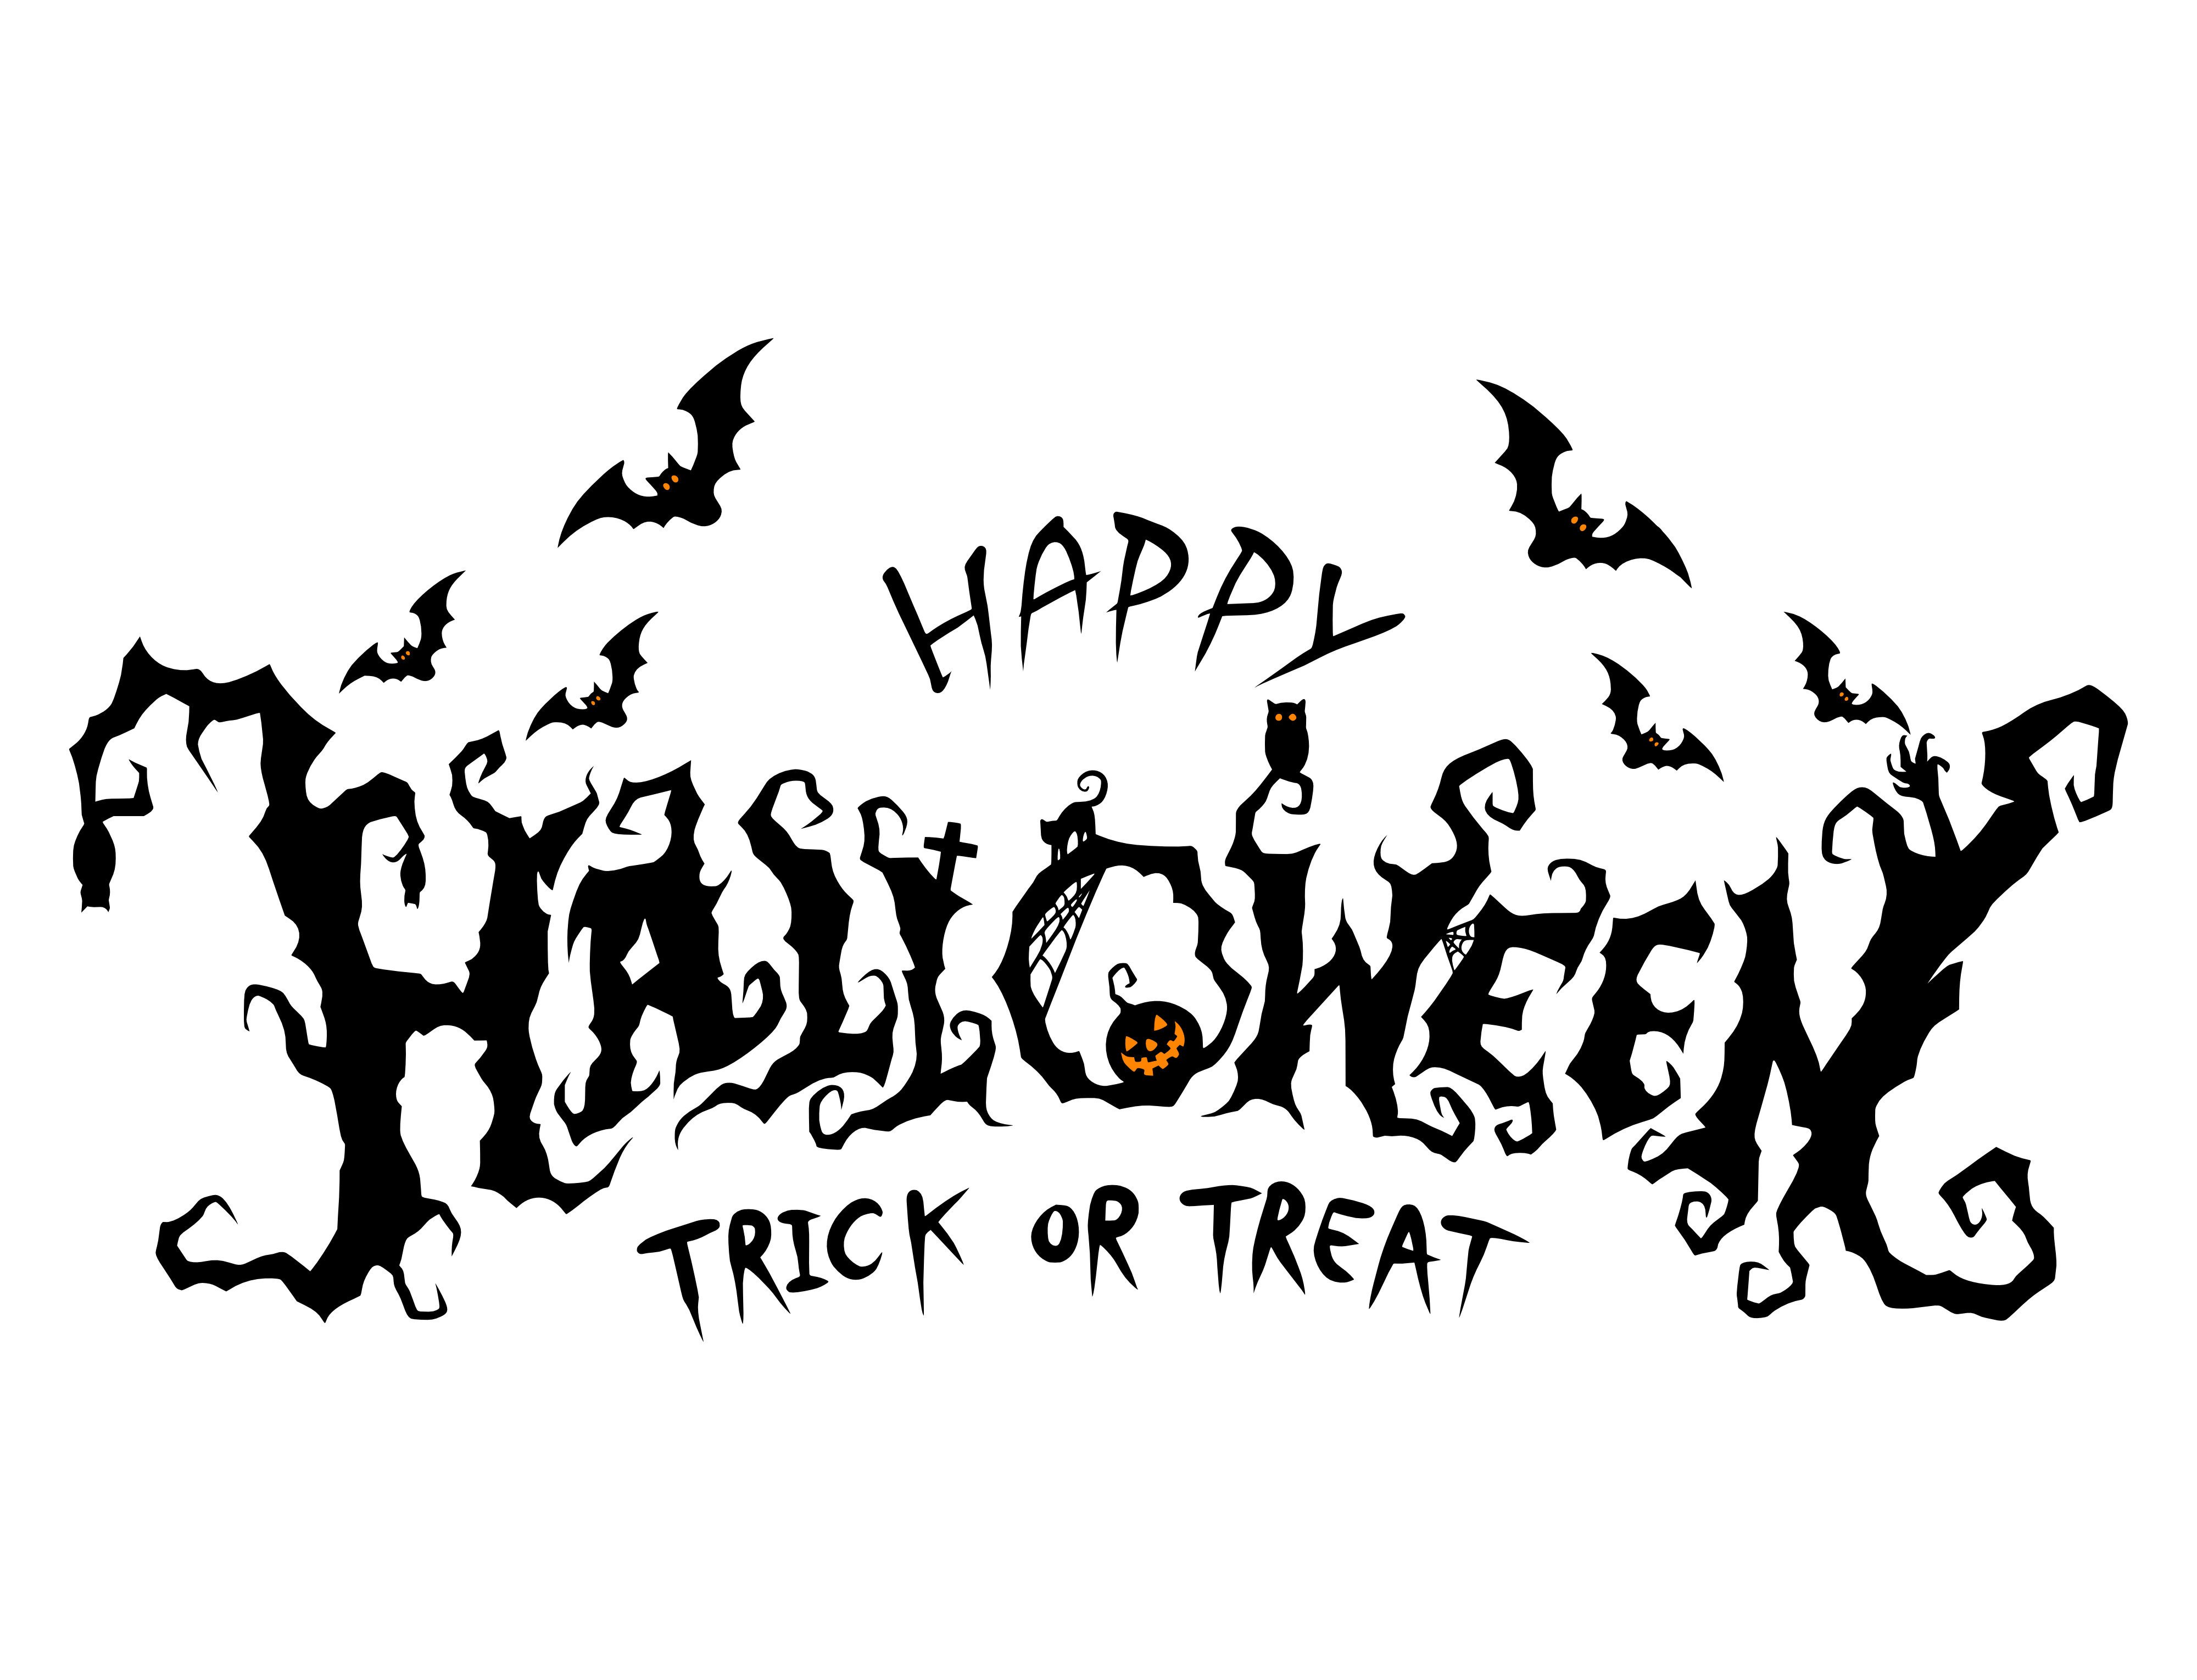 Happy Halloween Trick Or Treat Text Graphic By Tsatanist · Creative Fabrica